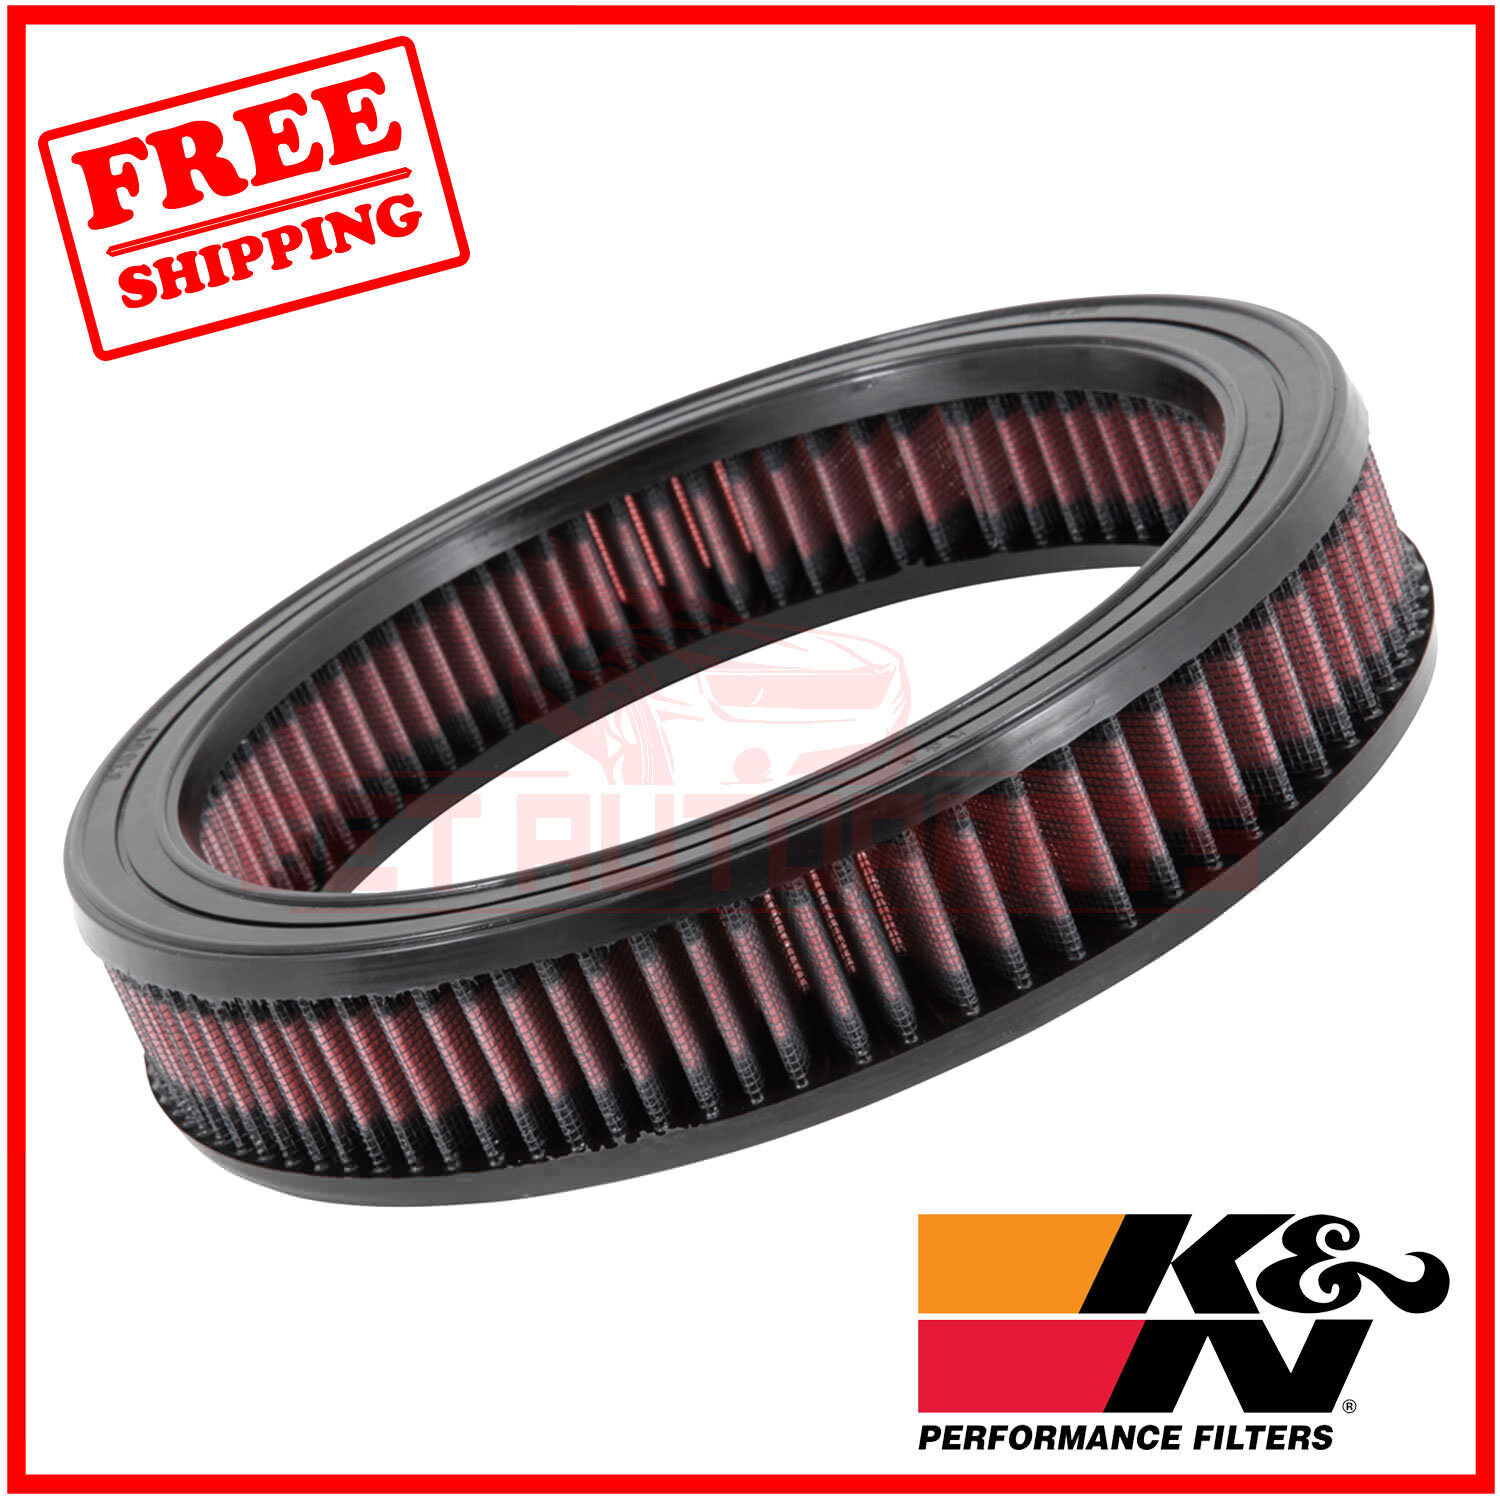 K&N Replacement Air Filter for Chevrolet Monza 1978-1979